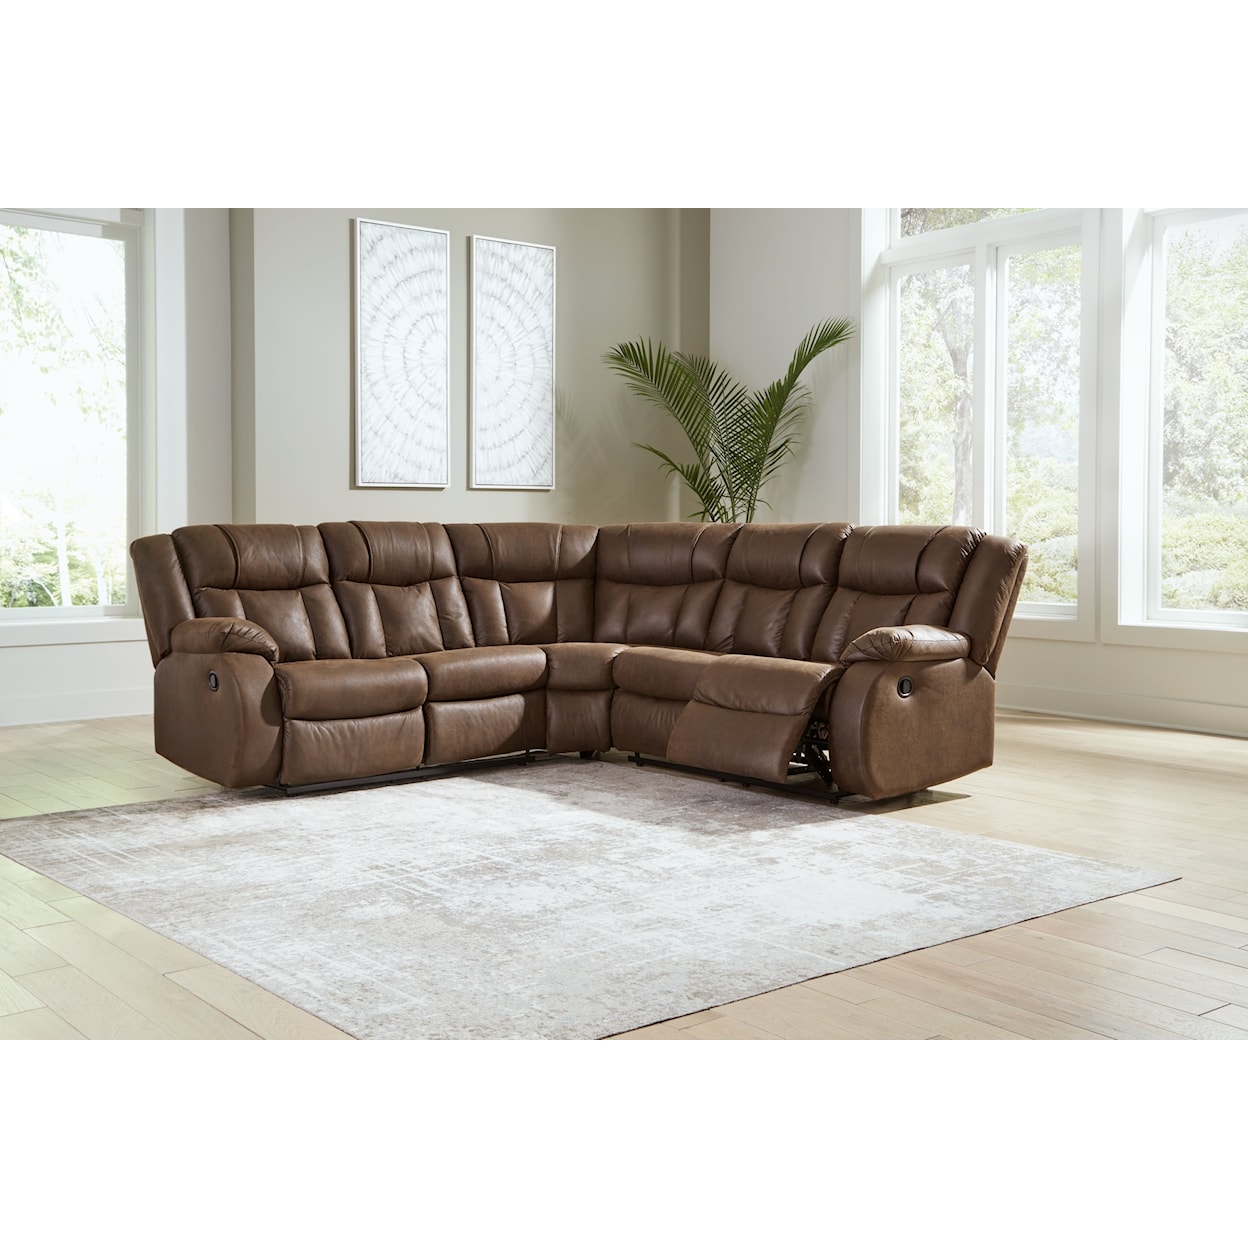 Signature Design by Ashley Trail Boys Reclining Sectional Sofa